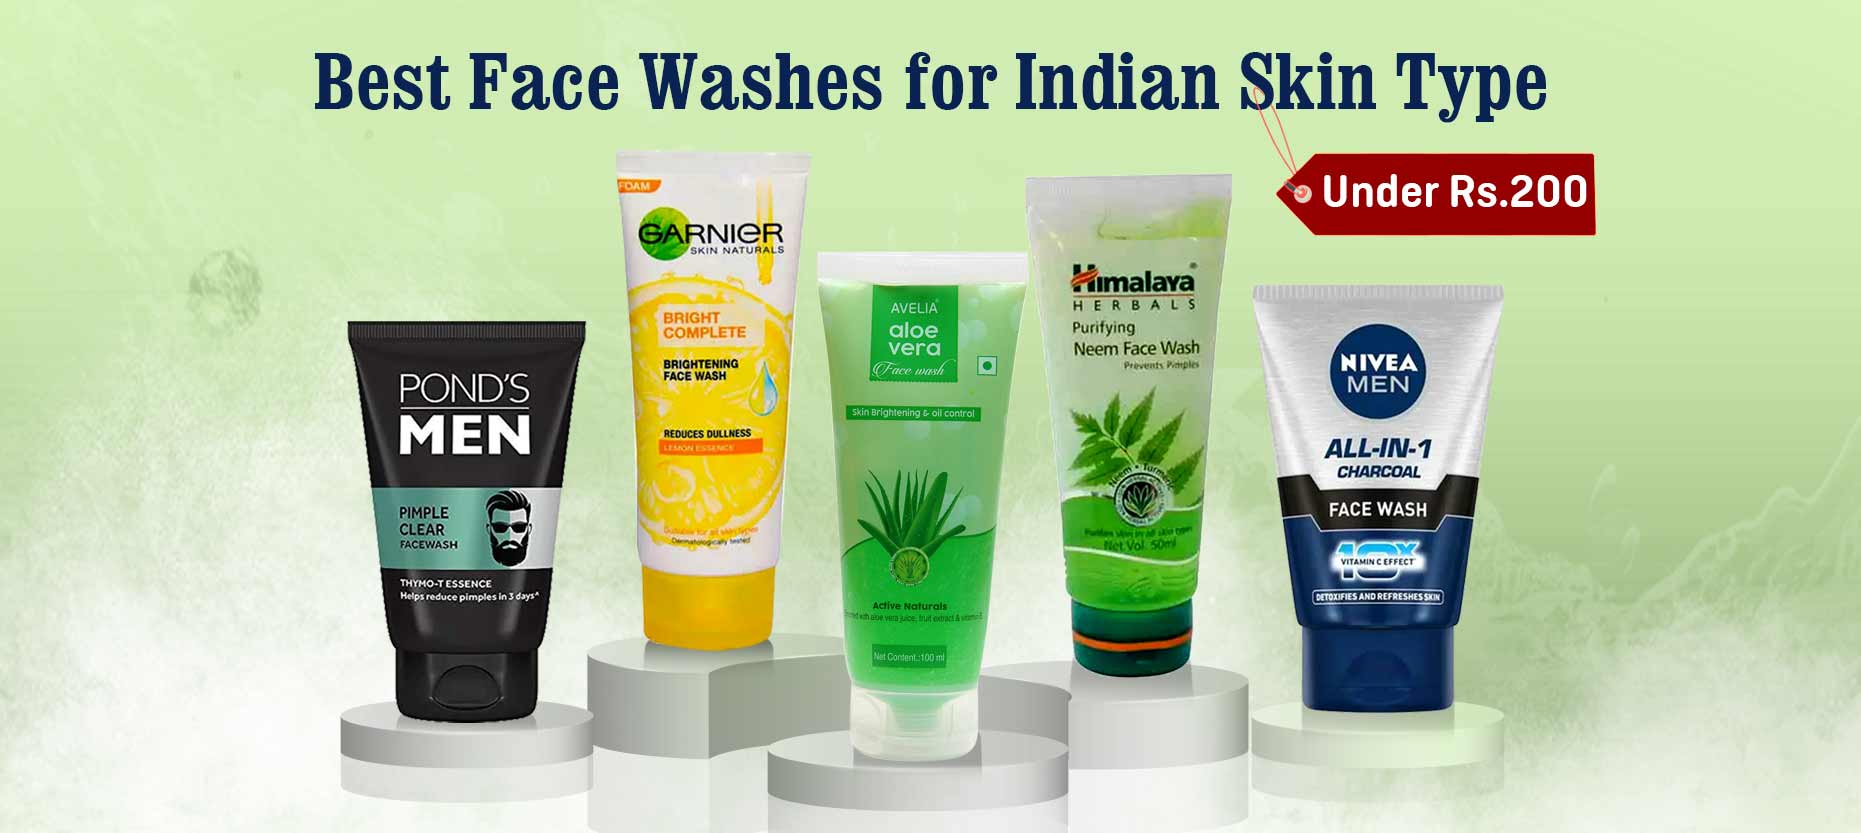 Best Face Washes for Indian Skin Type Under Rs.200